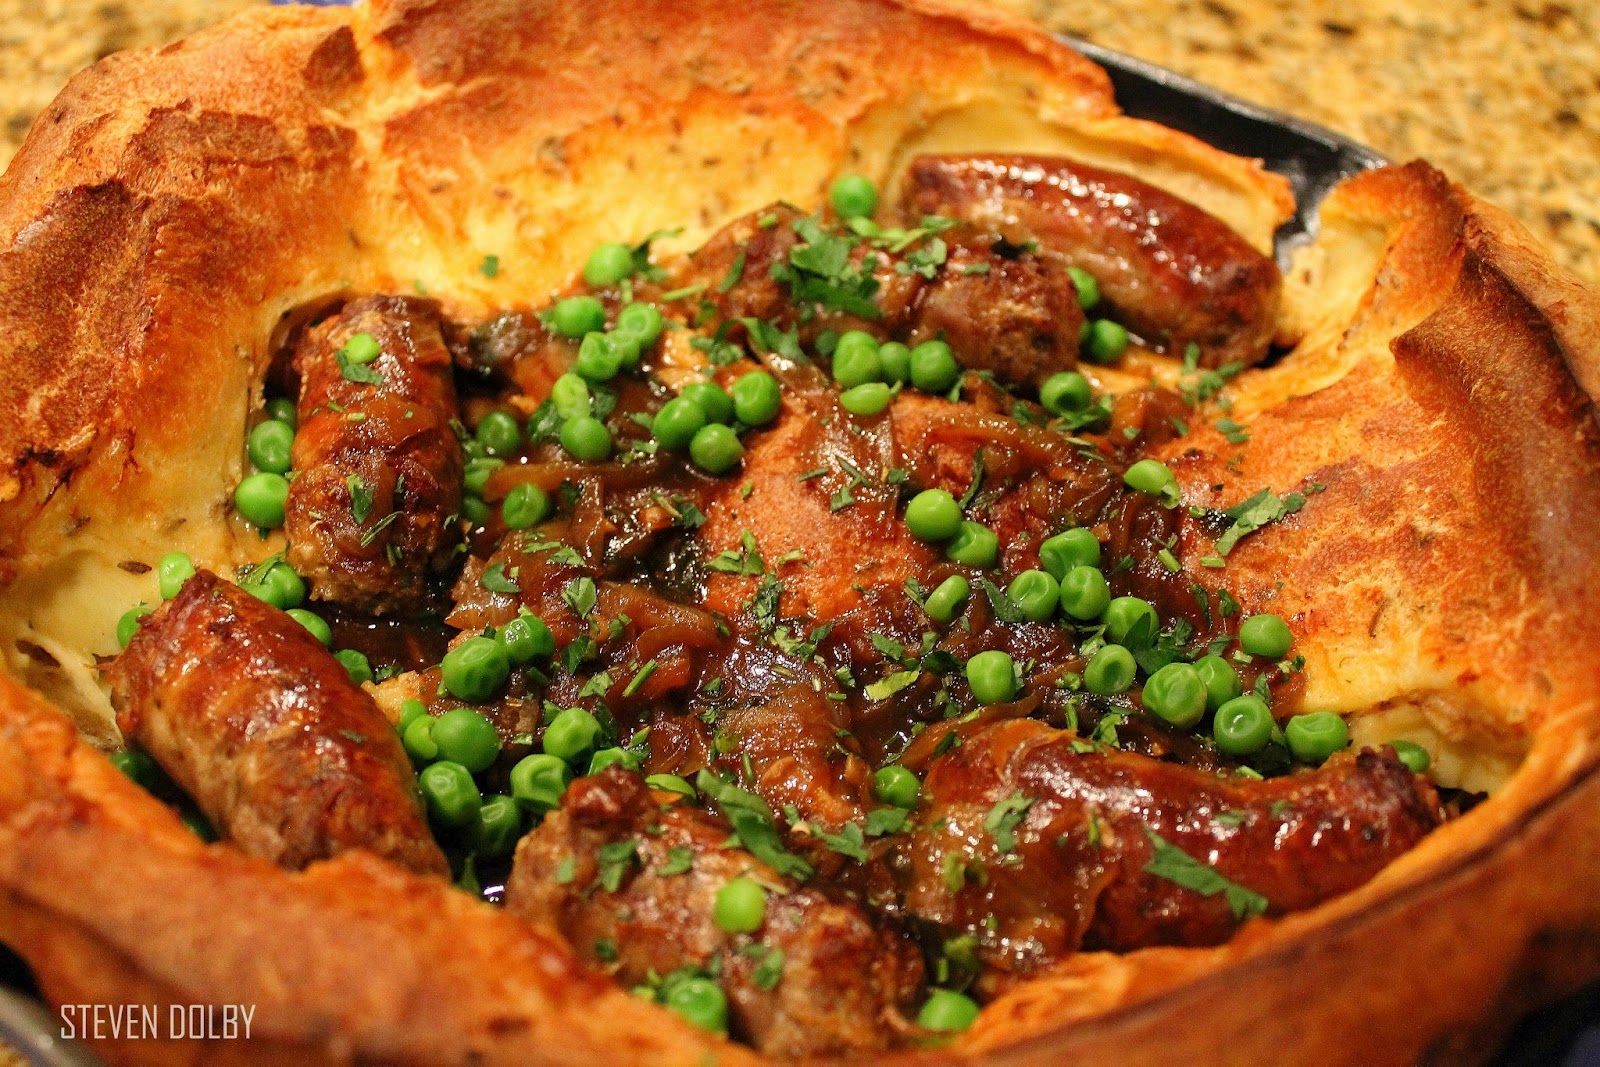 Toad in the hole by Steven Dolby